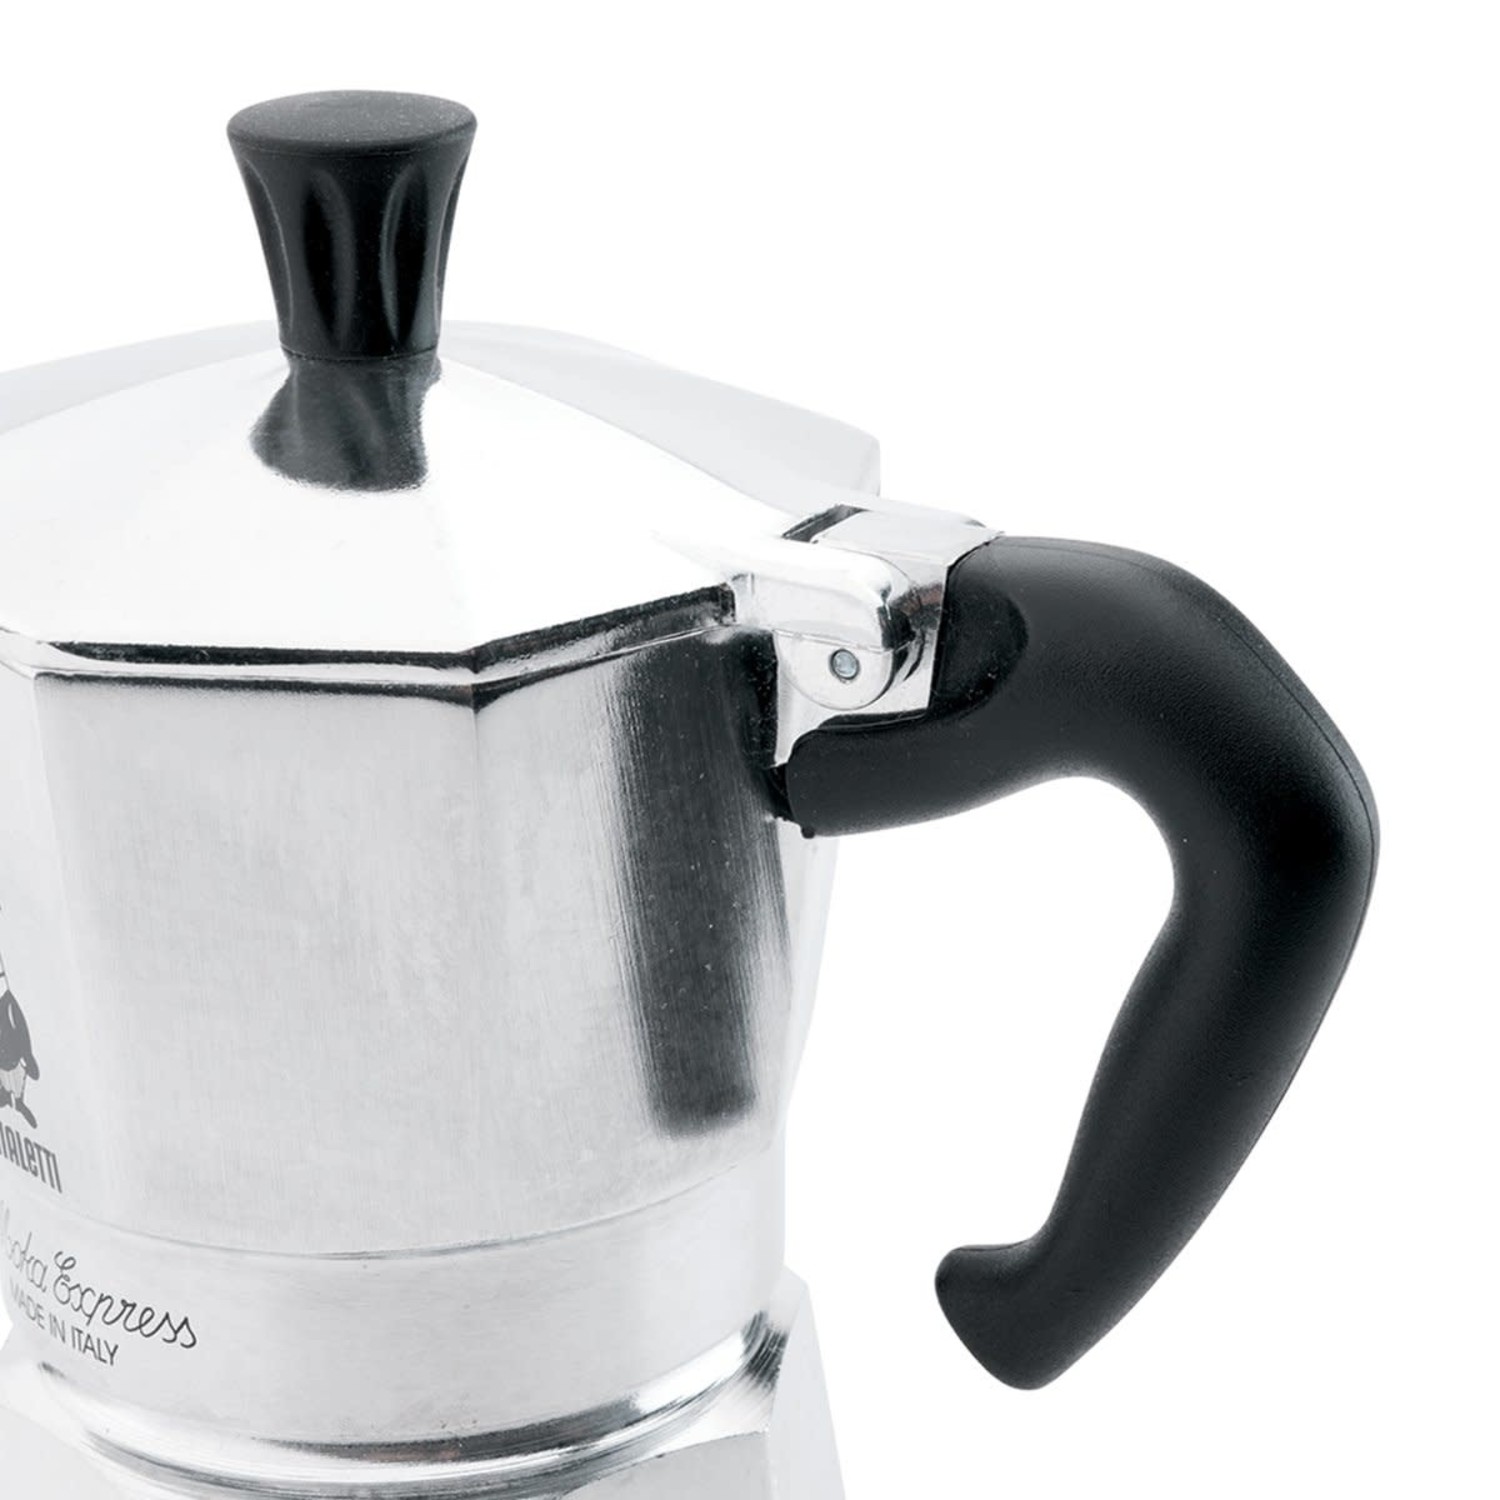 Bialetti 6 cup Stainless Steel Stovetop Espresso Maker - Whisk